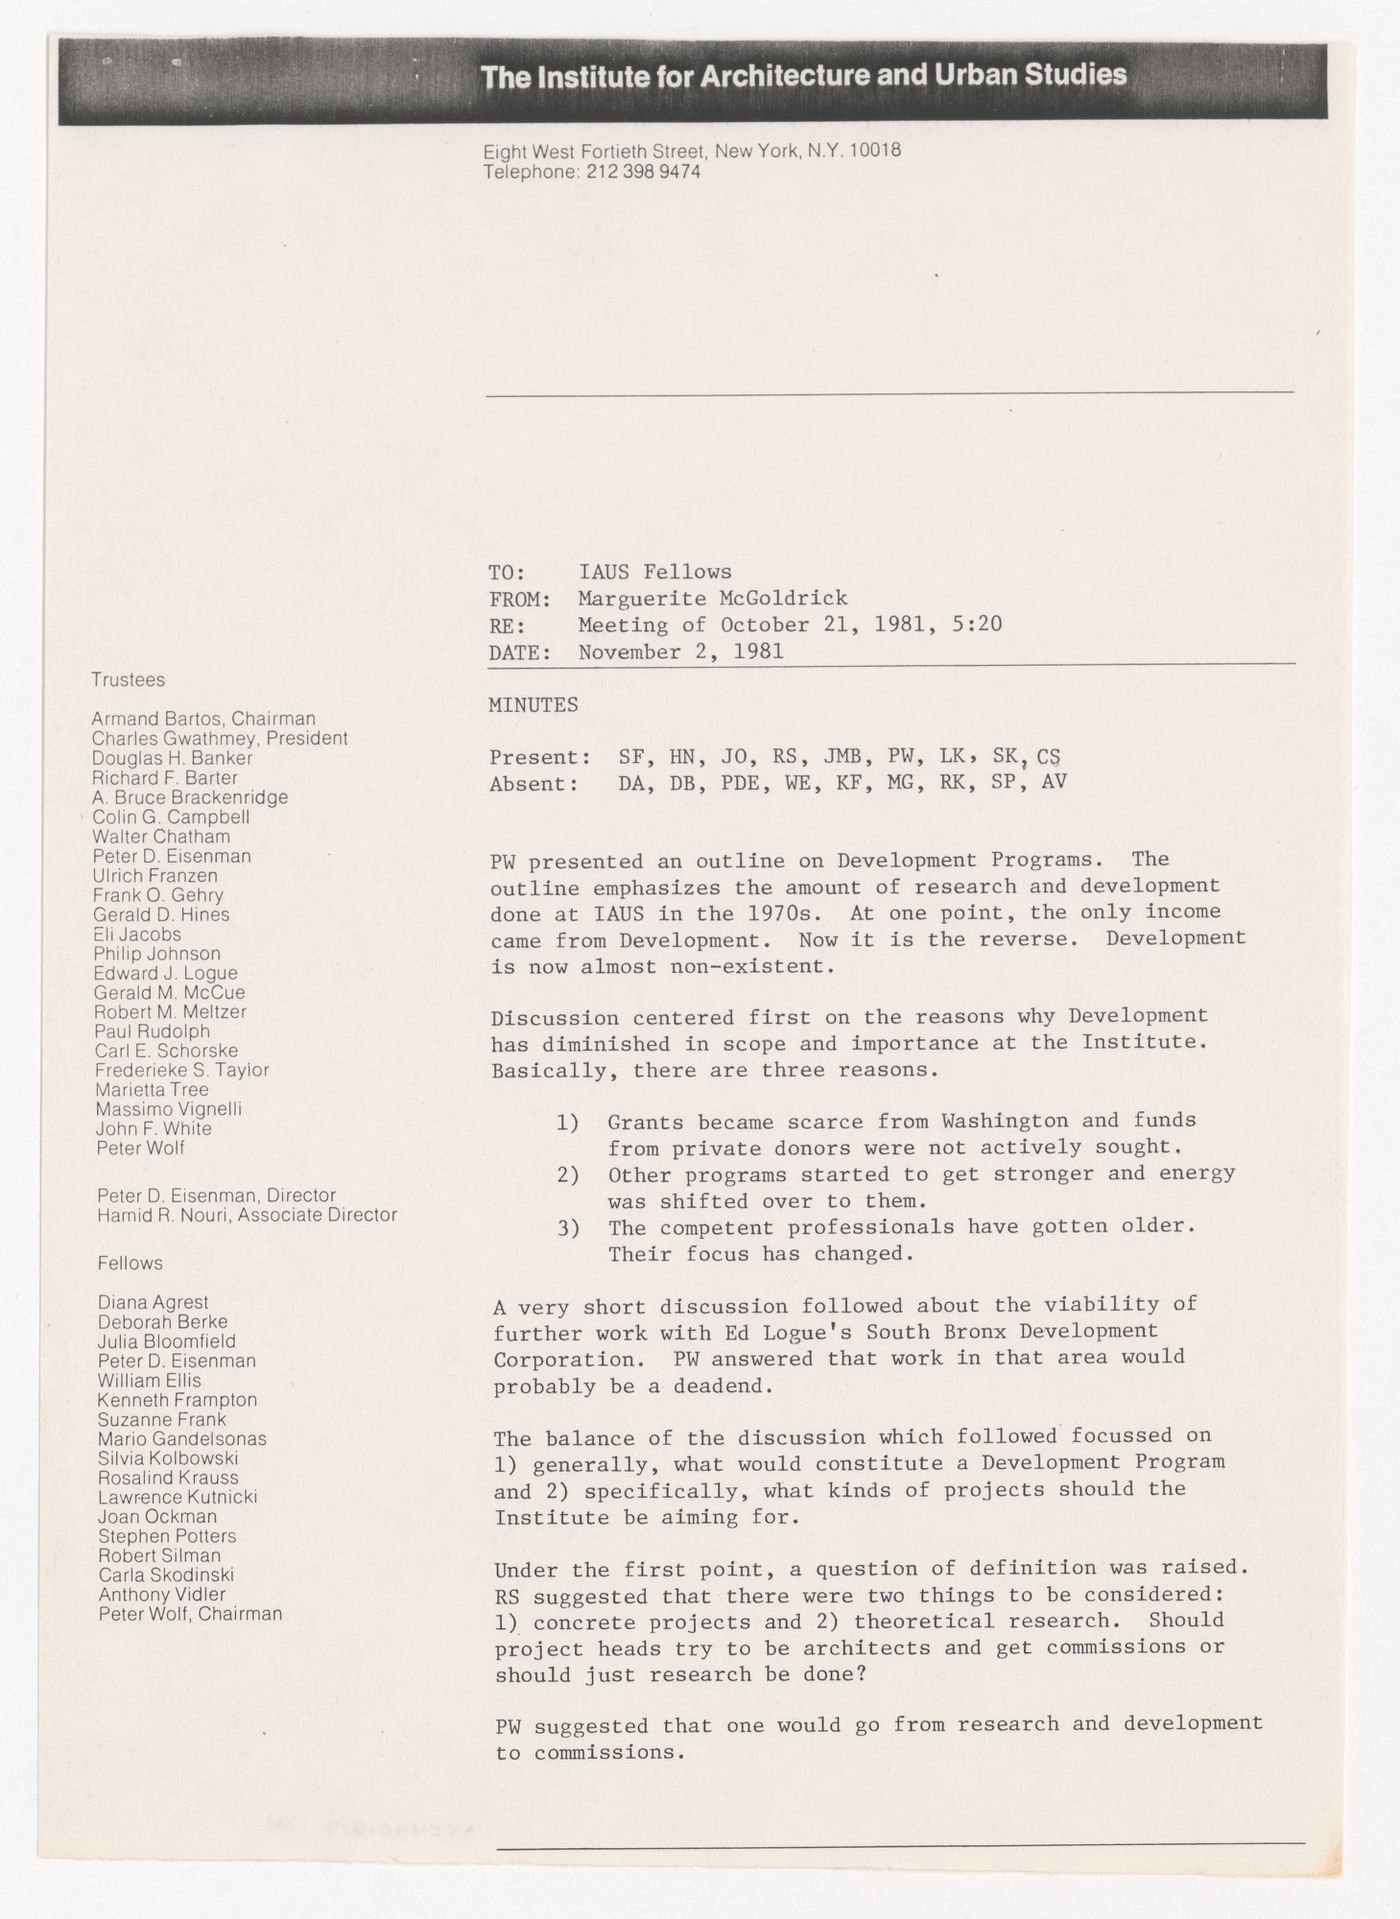 Minutes of meeting of the Fellows of October 21st, 1981